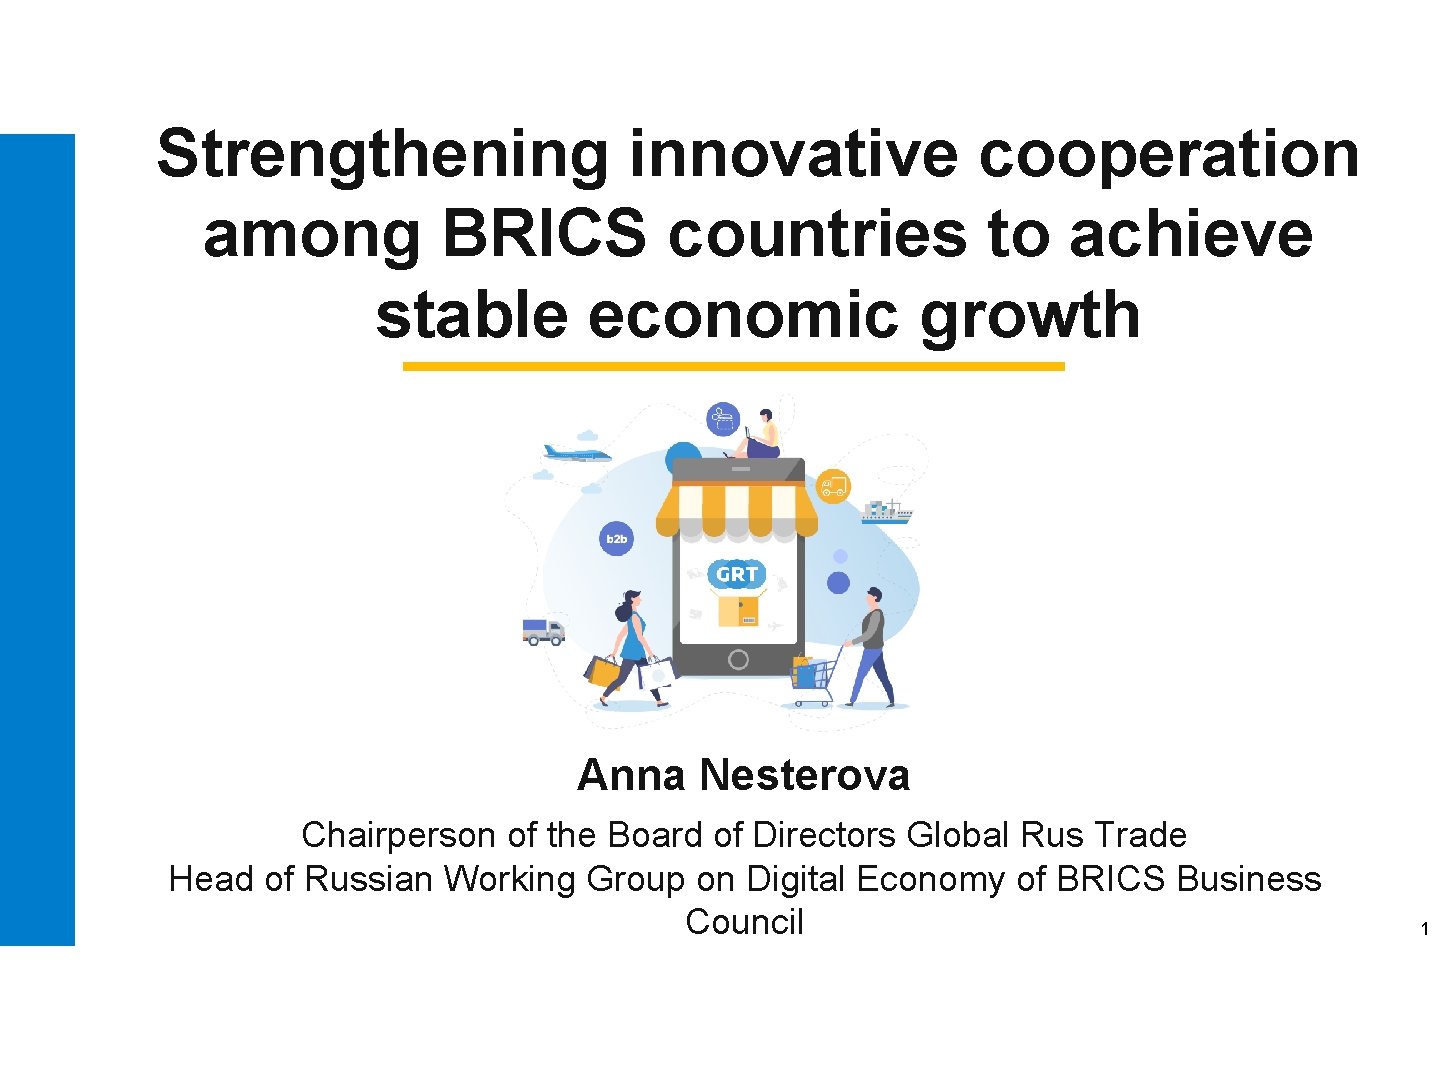 Strengthening innovative cooperation among BRICS countries to achieve stable economic growth Anna Nesterova Chairperson